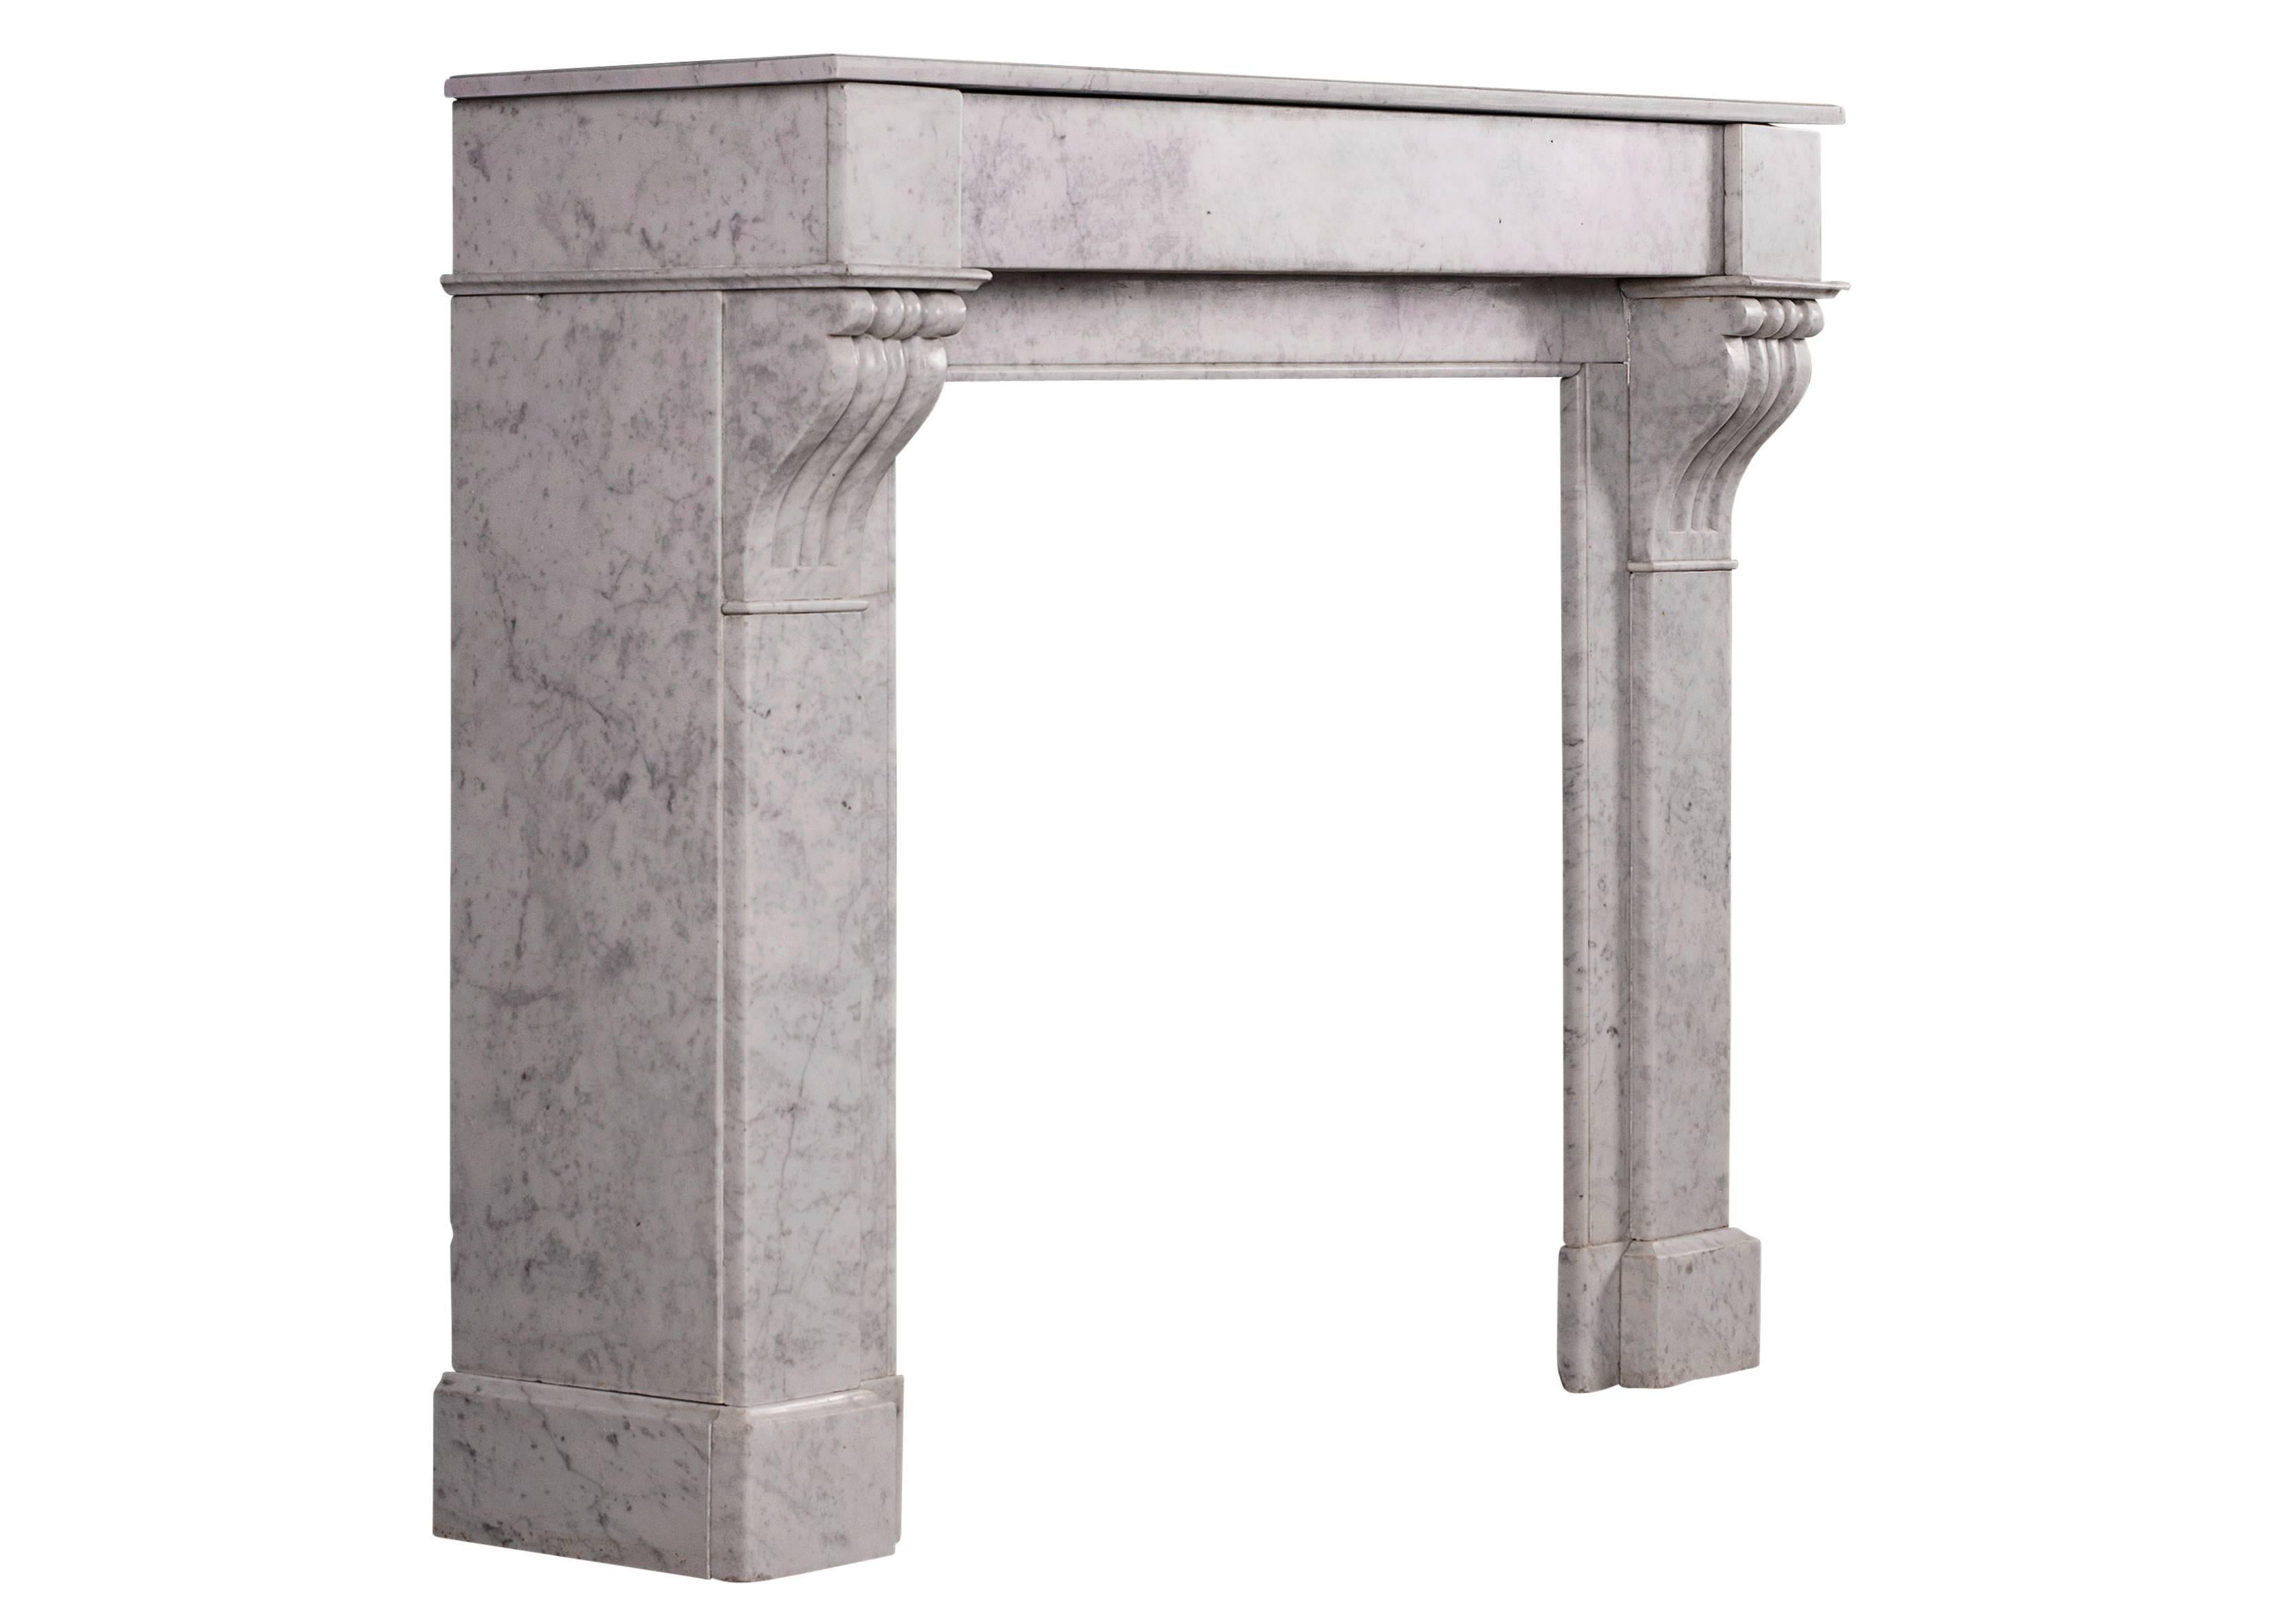 A petite French, Louis Philippe Carrara marble fireplace. The jambs with scrolled brackets to top, surmounted by plain frieze and moulded shelf. Early/mid-19th century. Well suited for a bedroom or smaller study.

Measures:
Shelf Width:	1110 mm     